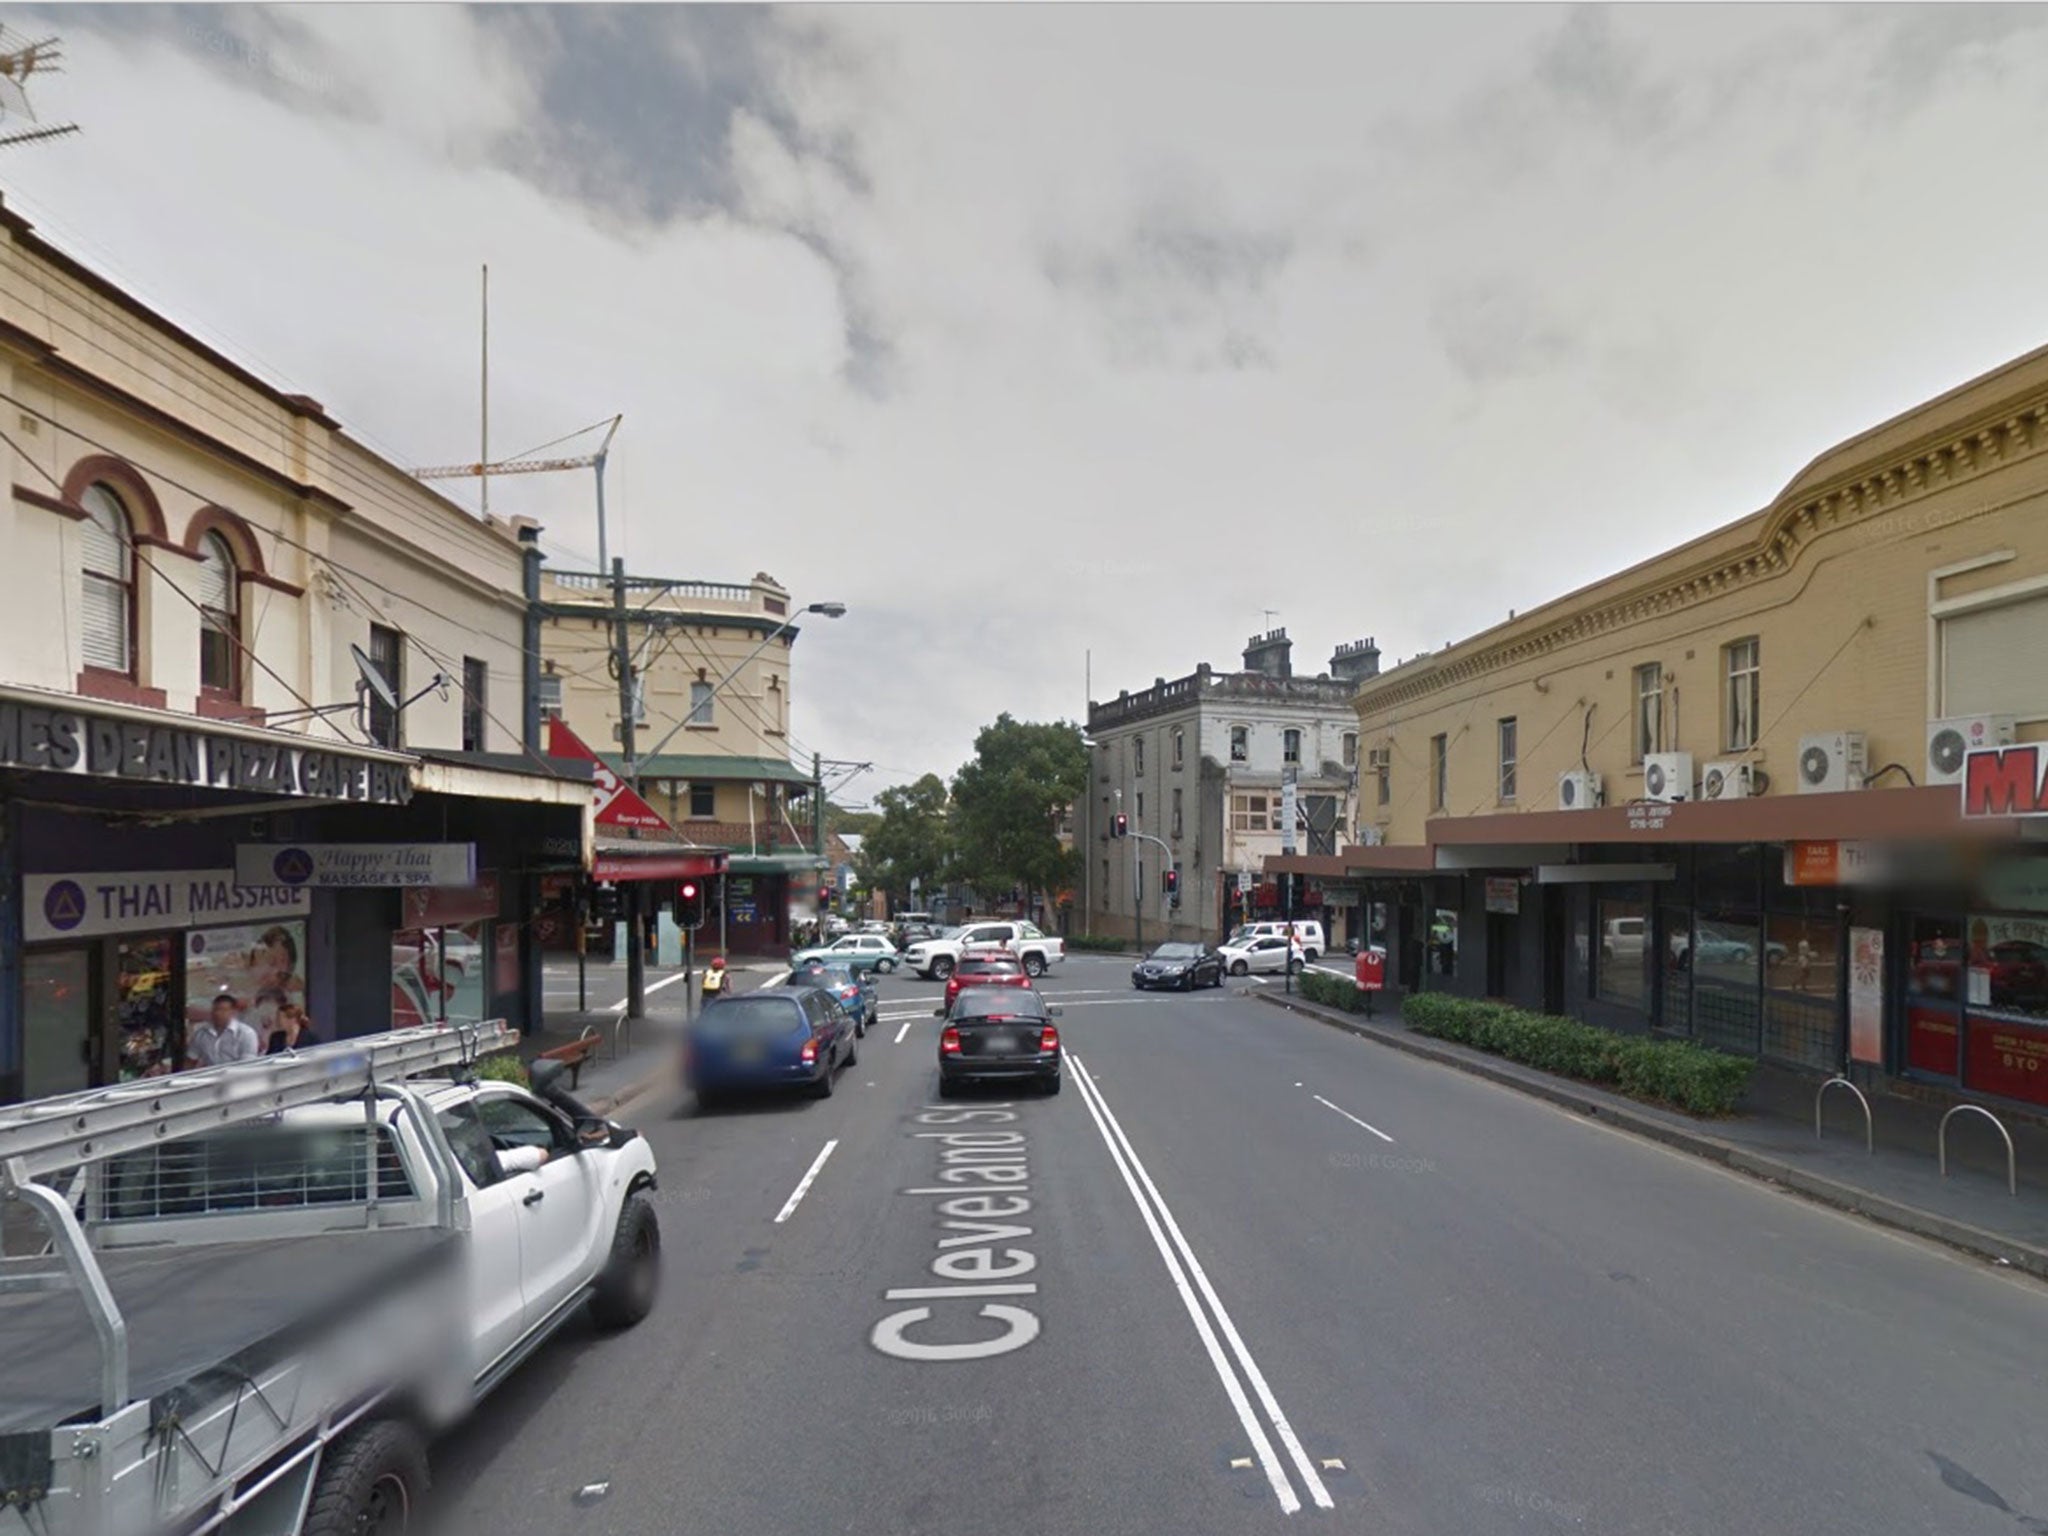 The attack reportedly happened on Cleveland Street, in the Redfern area of Sydney